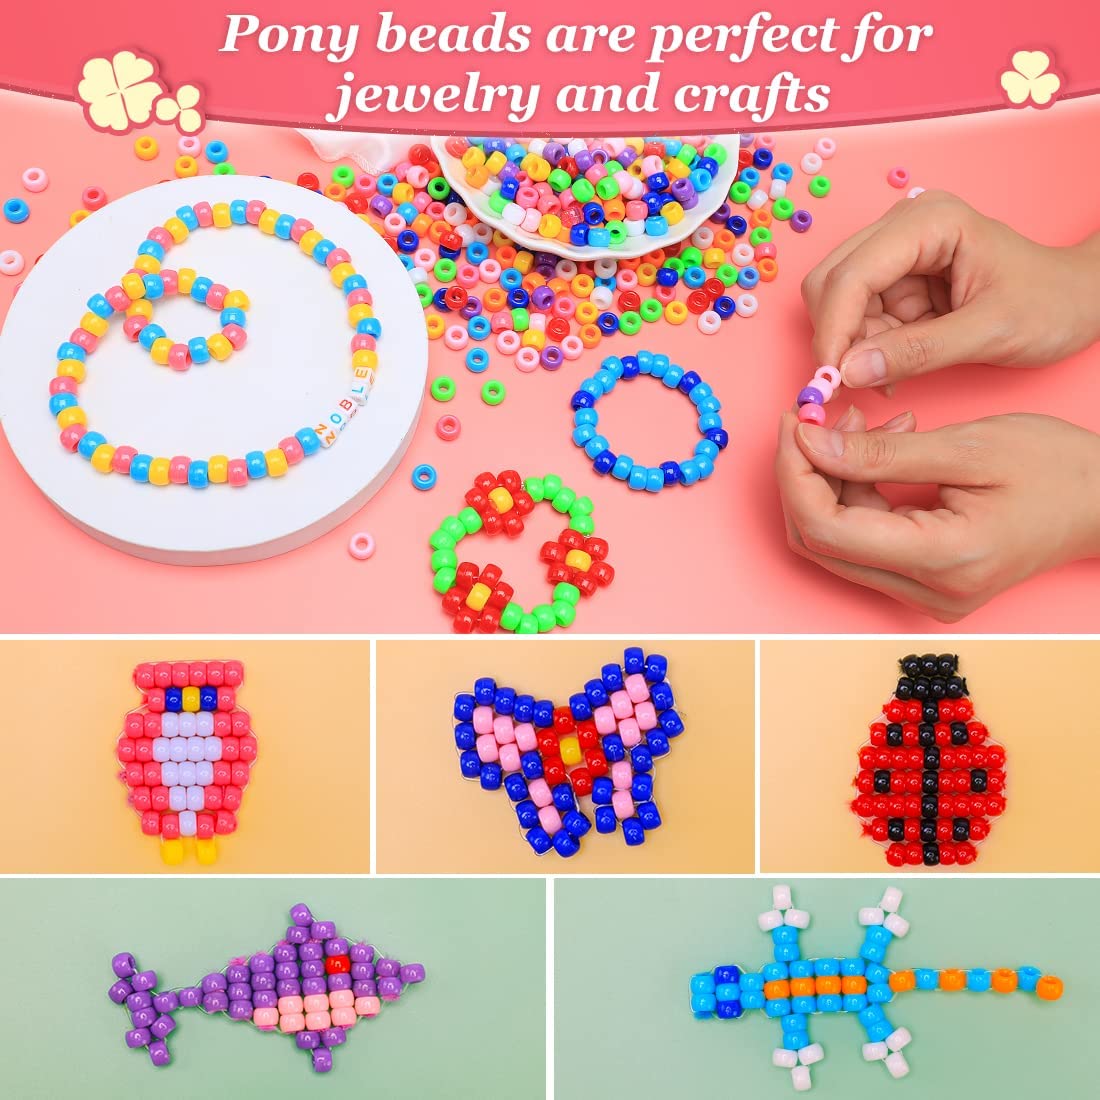 Transparent Red Pony Beads Great Craft Projects for All Ages Bead Jewelry,  Ornaments, Key Chains, Hair Beading Round Plastic Bead With Center Hole